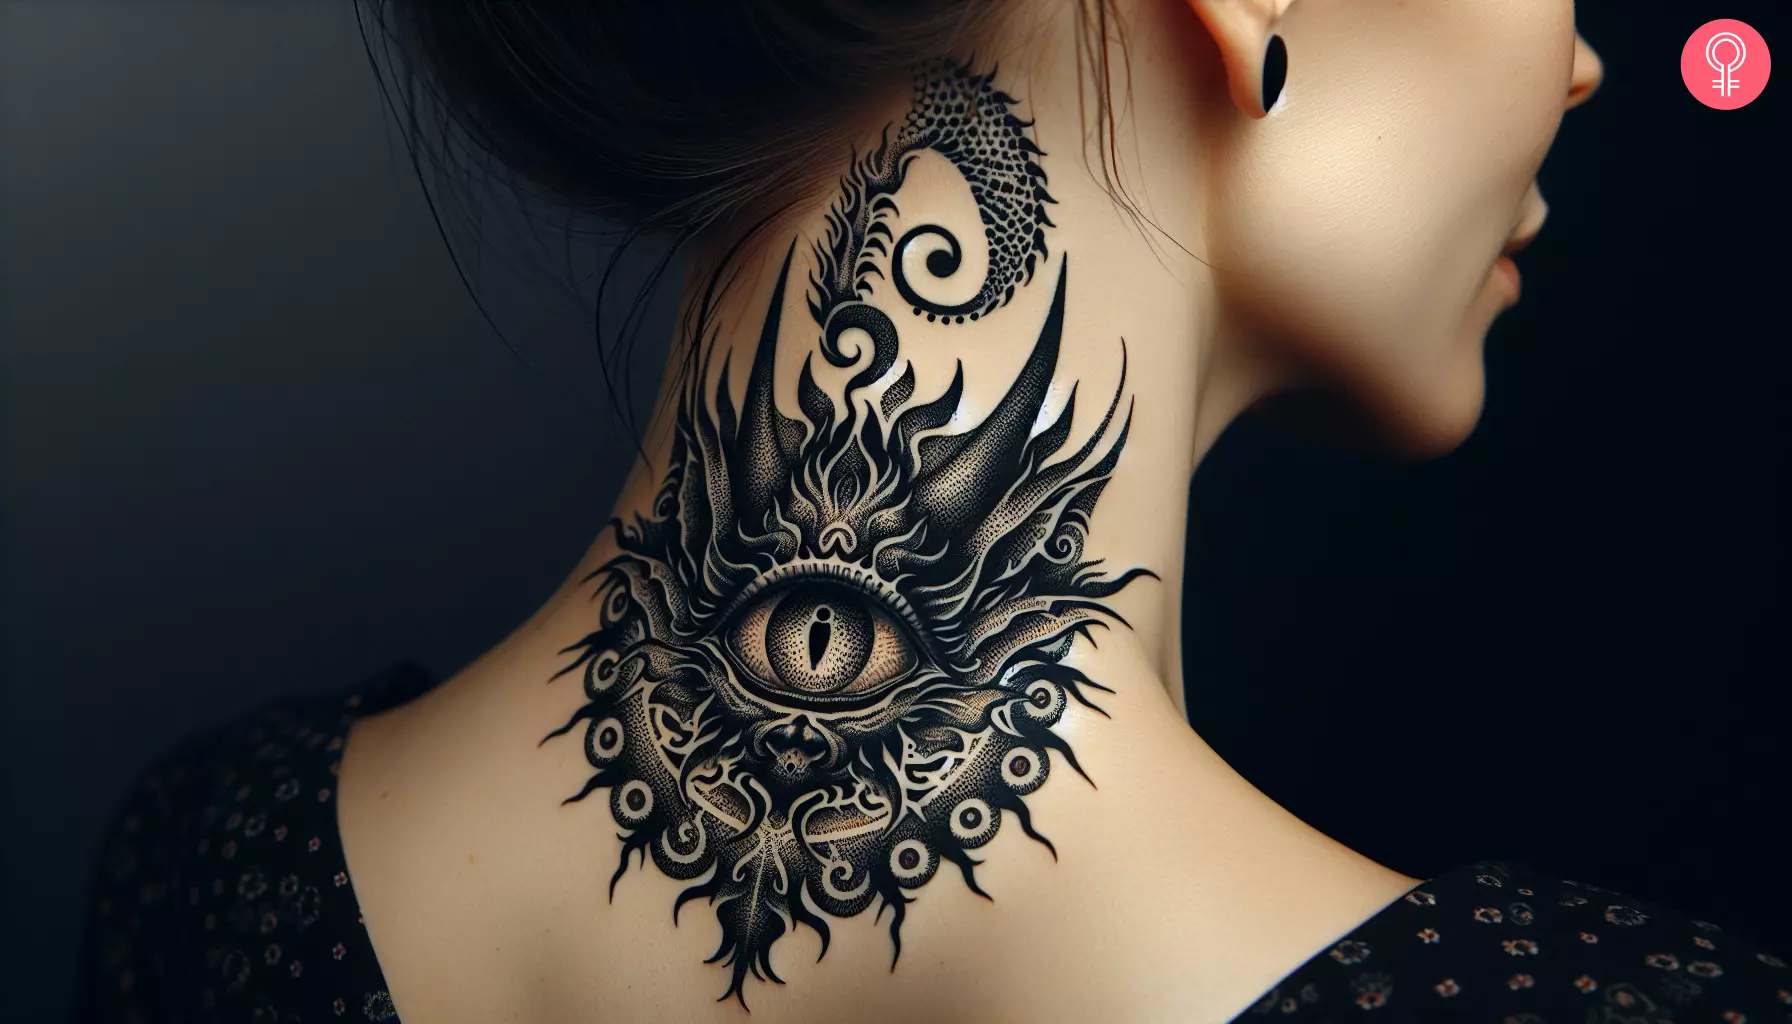 Demon eye tattoo on the back of the neck